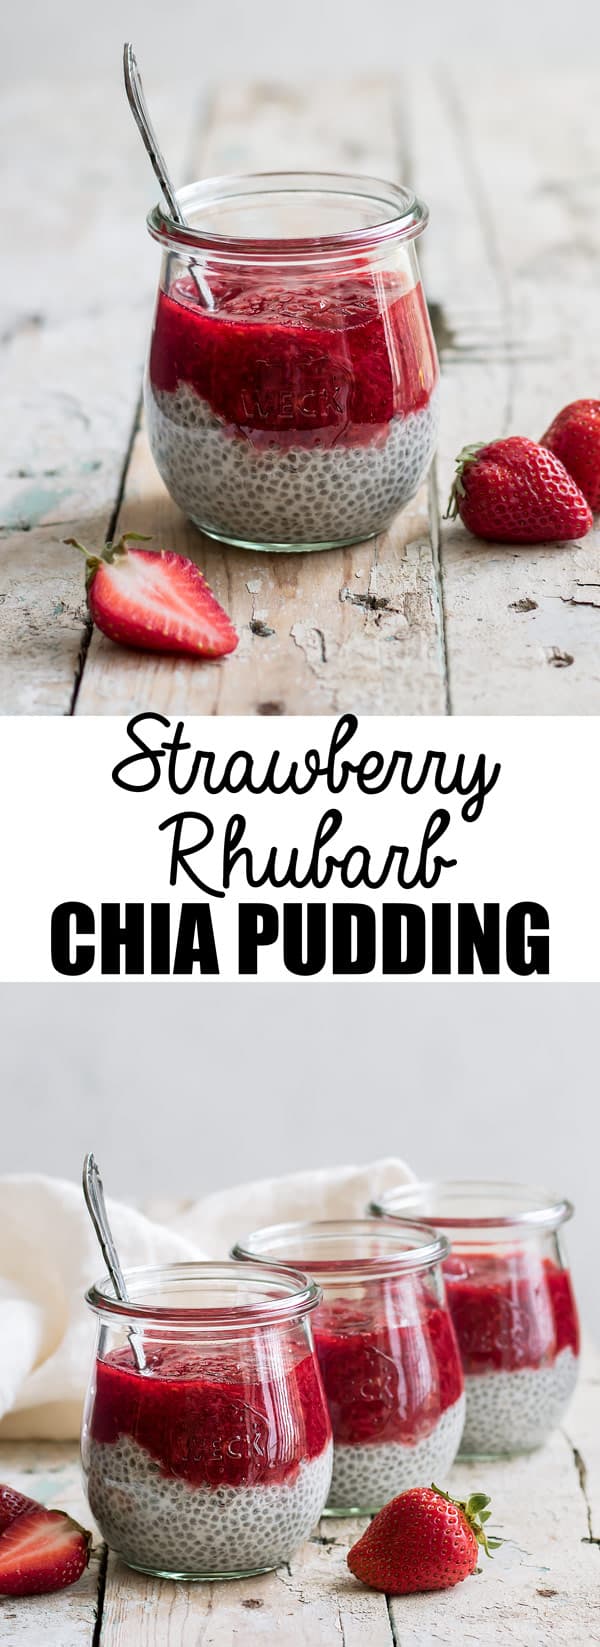 Strawberry Rhubarb chia pudding-This easy breakfast recipe is made with coconut milk and vanilla and is topped with a strawberry rhubarb compote! #chiapudding #chia #vegan #glutenfree #healthybrakfast